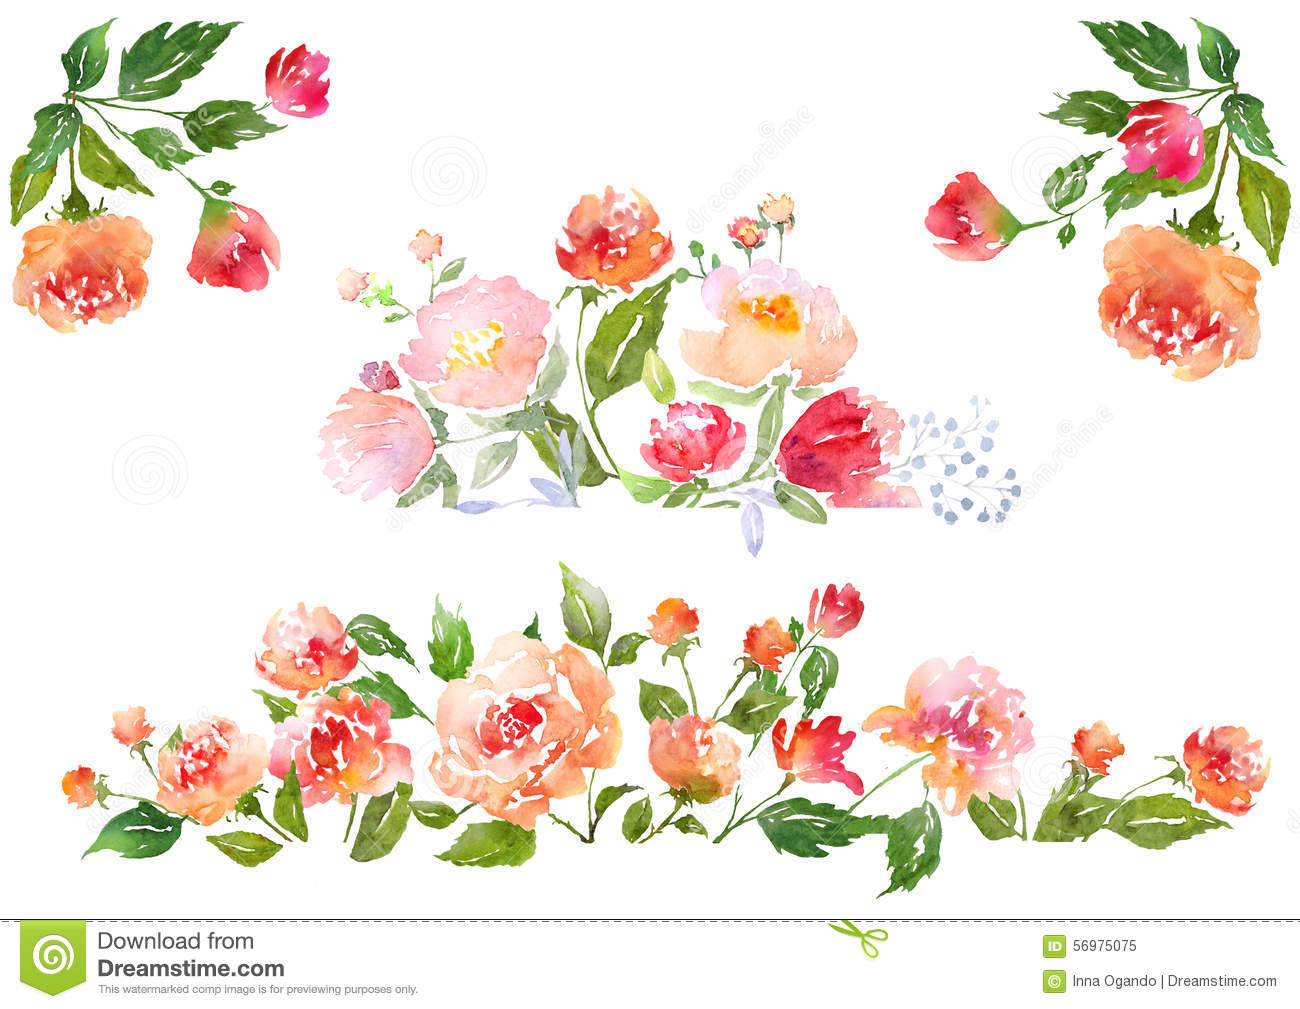 Free Watercolor Floral Clipart.